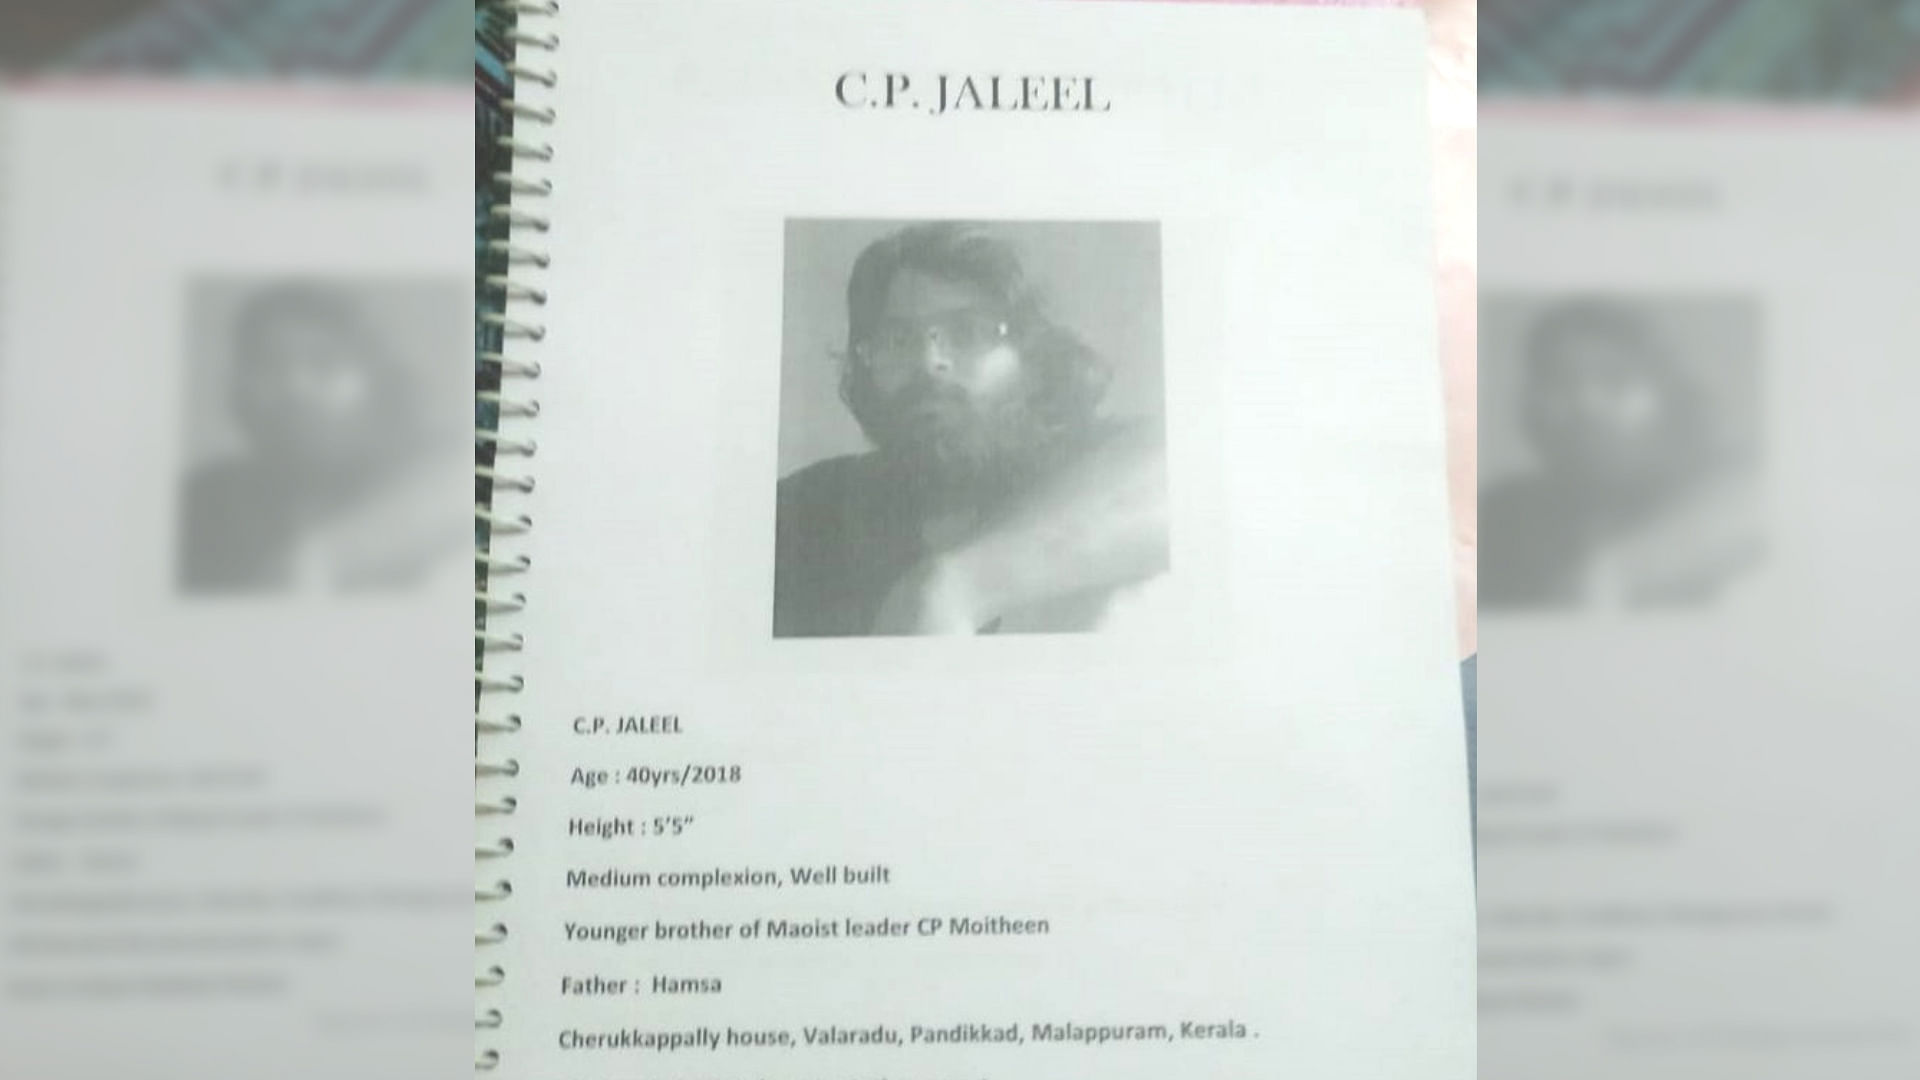 Maoist leader CP Jaleel was killed in an encounter with Kerala Police.